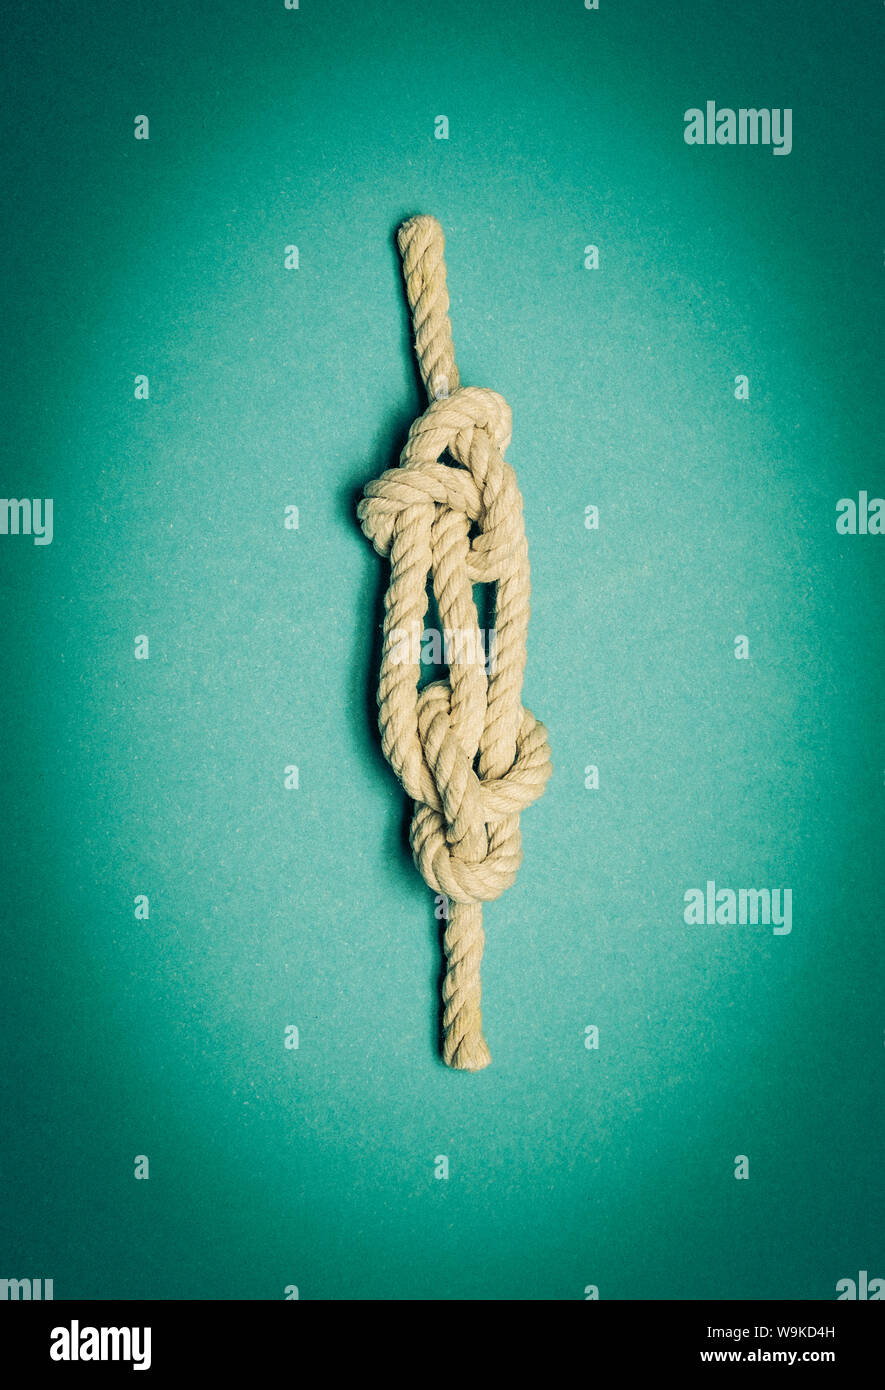 nautical knot with white rope on a turquoise background. book cover potential. Stock Photo